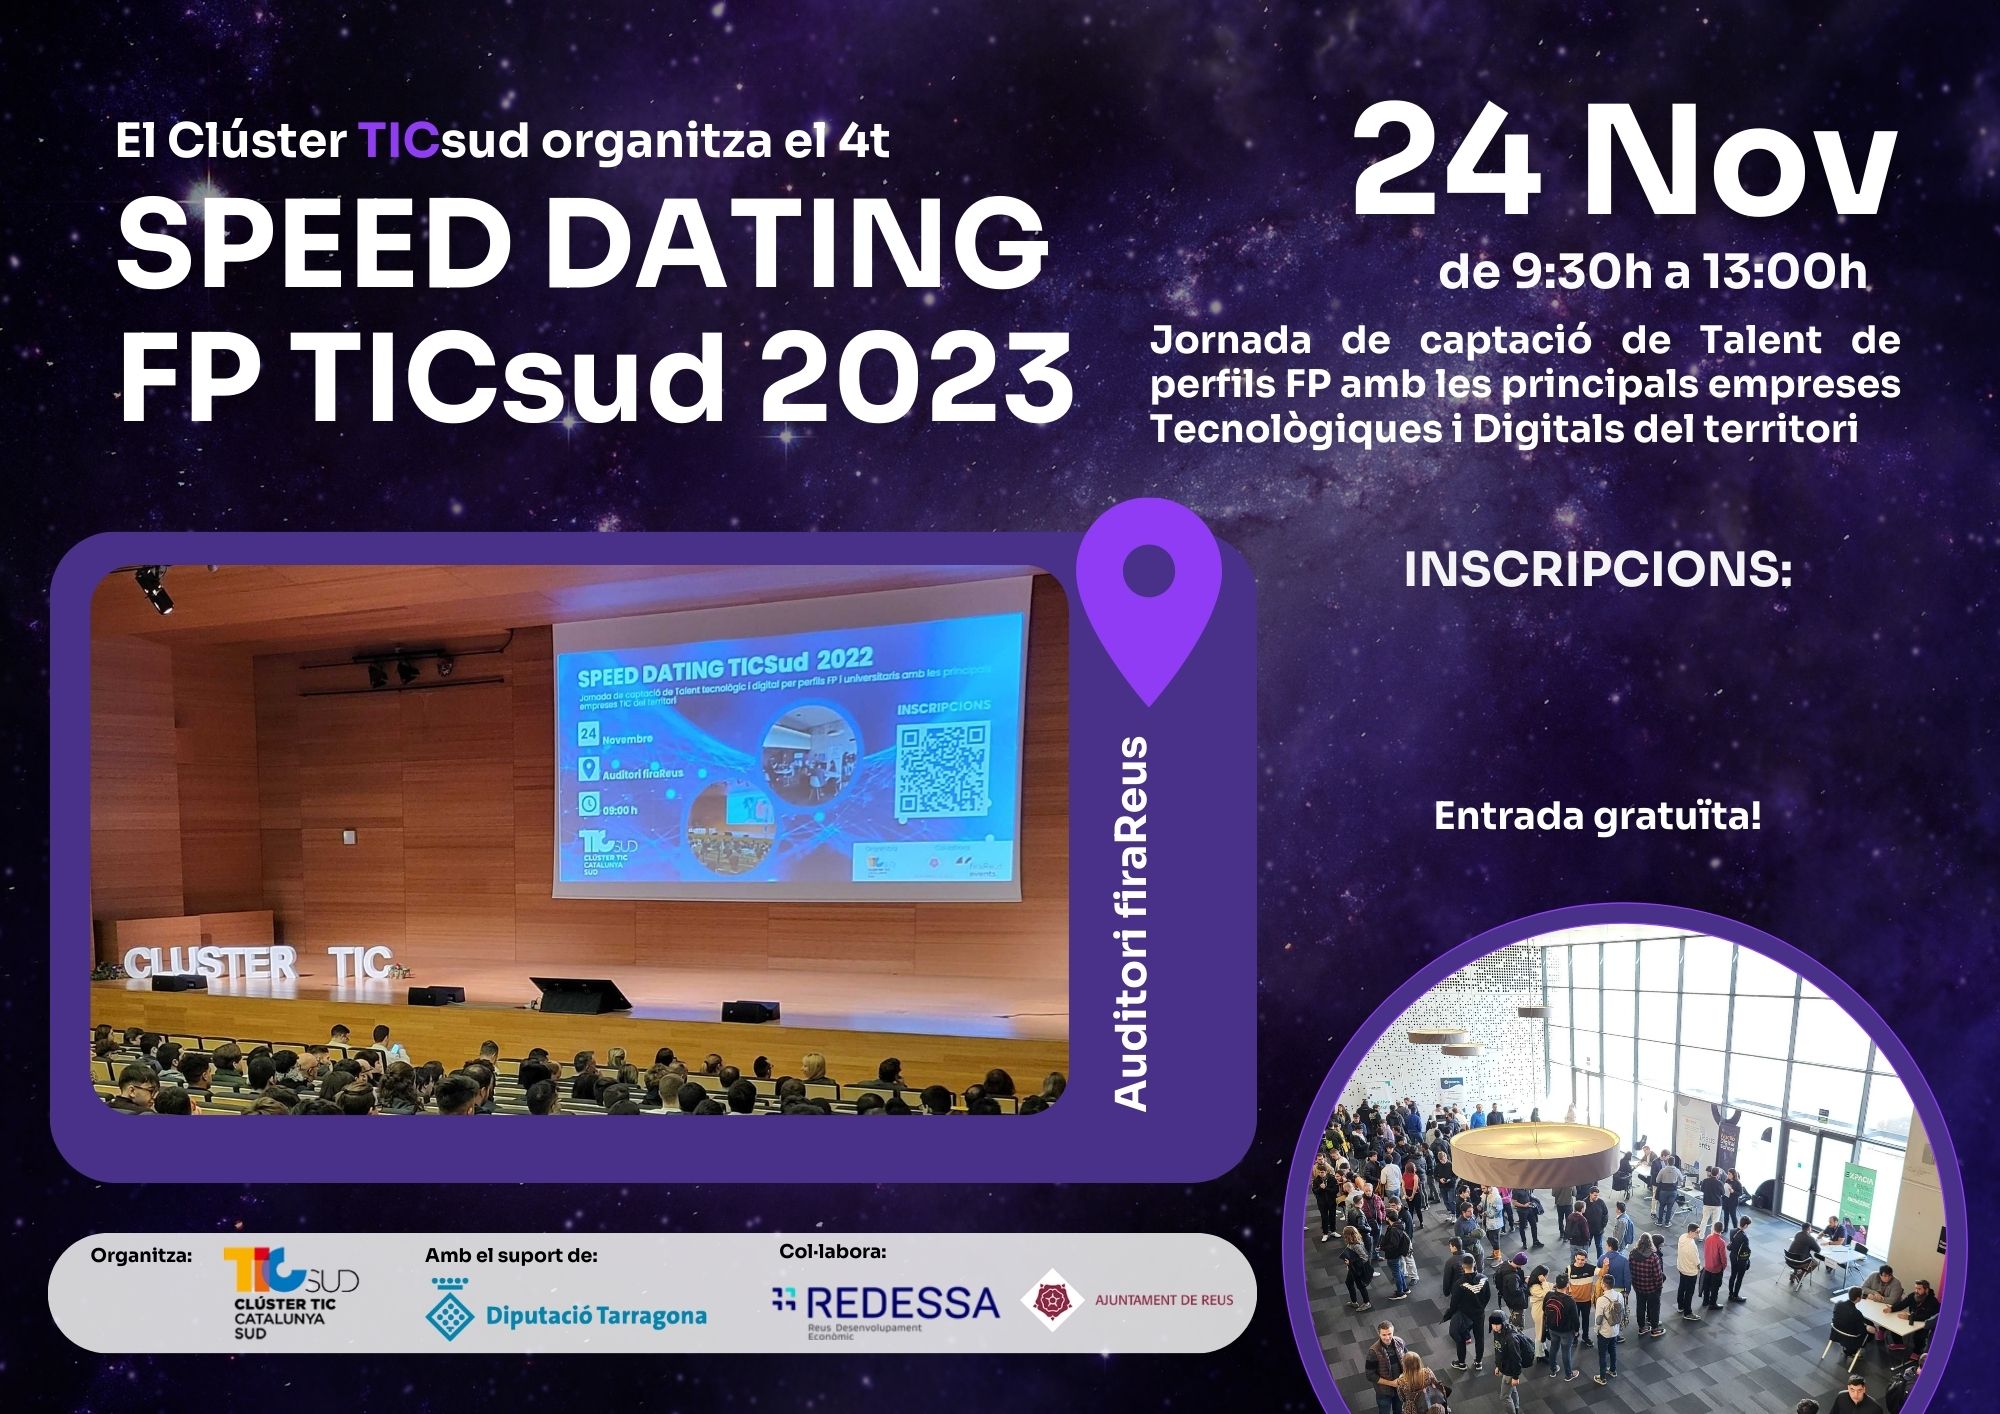 Speed Dating FP TIC Sud 2023